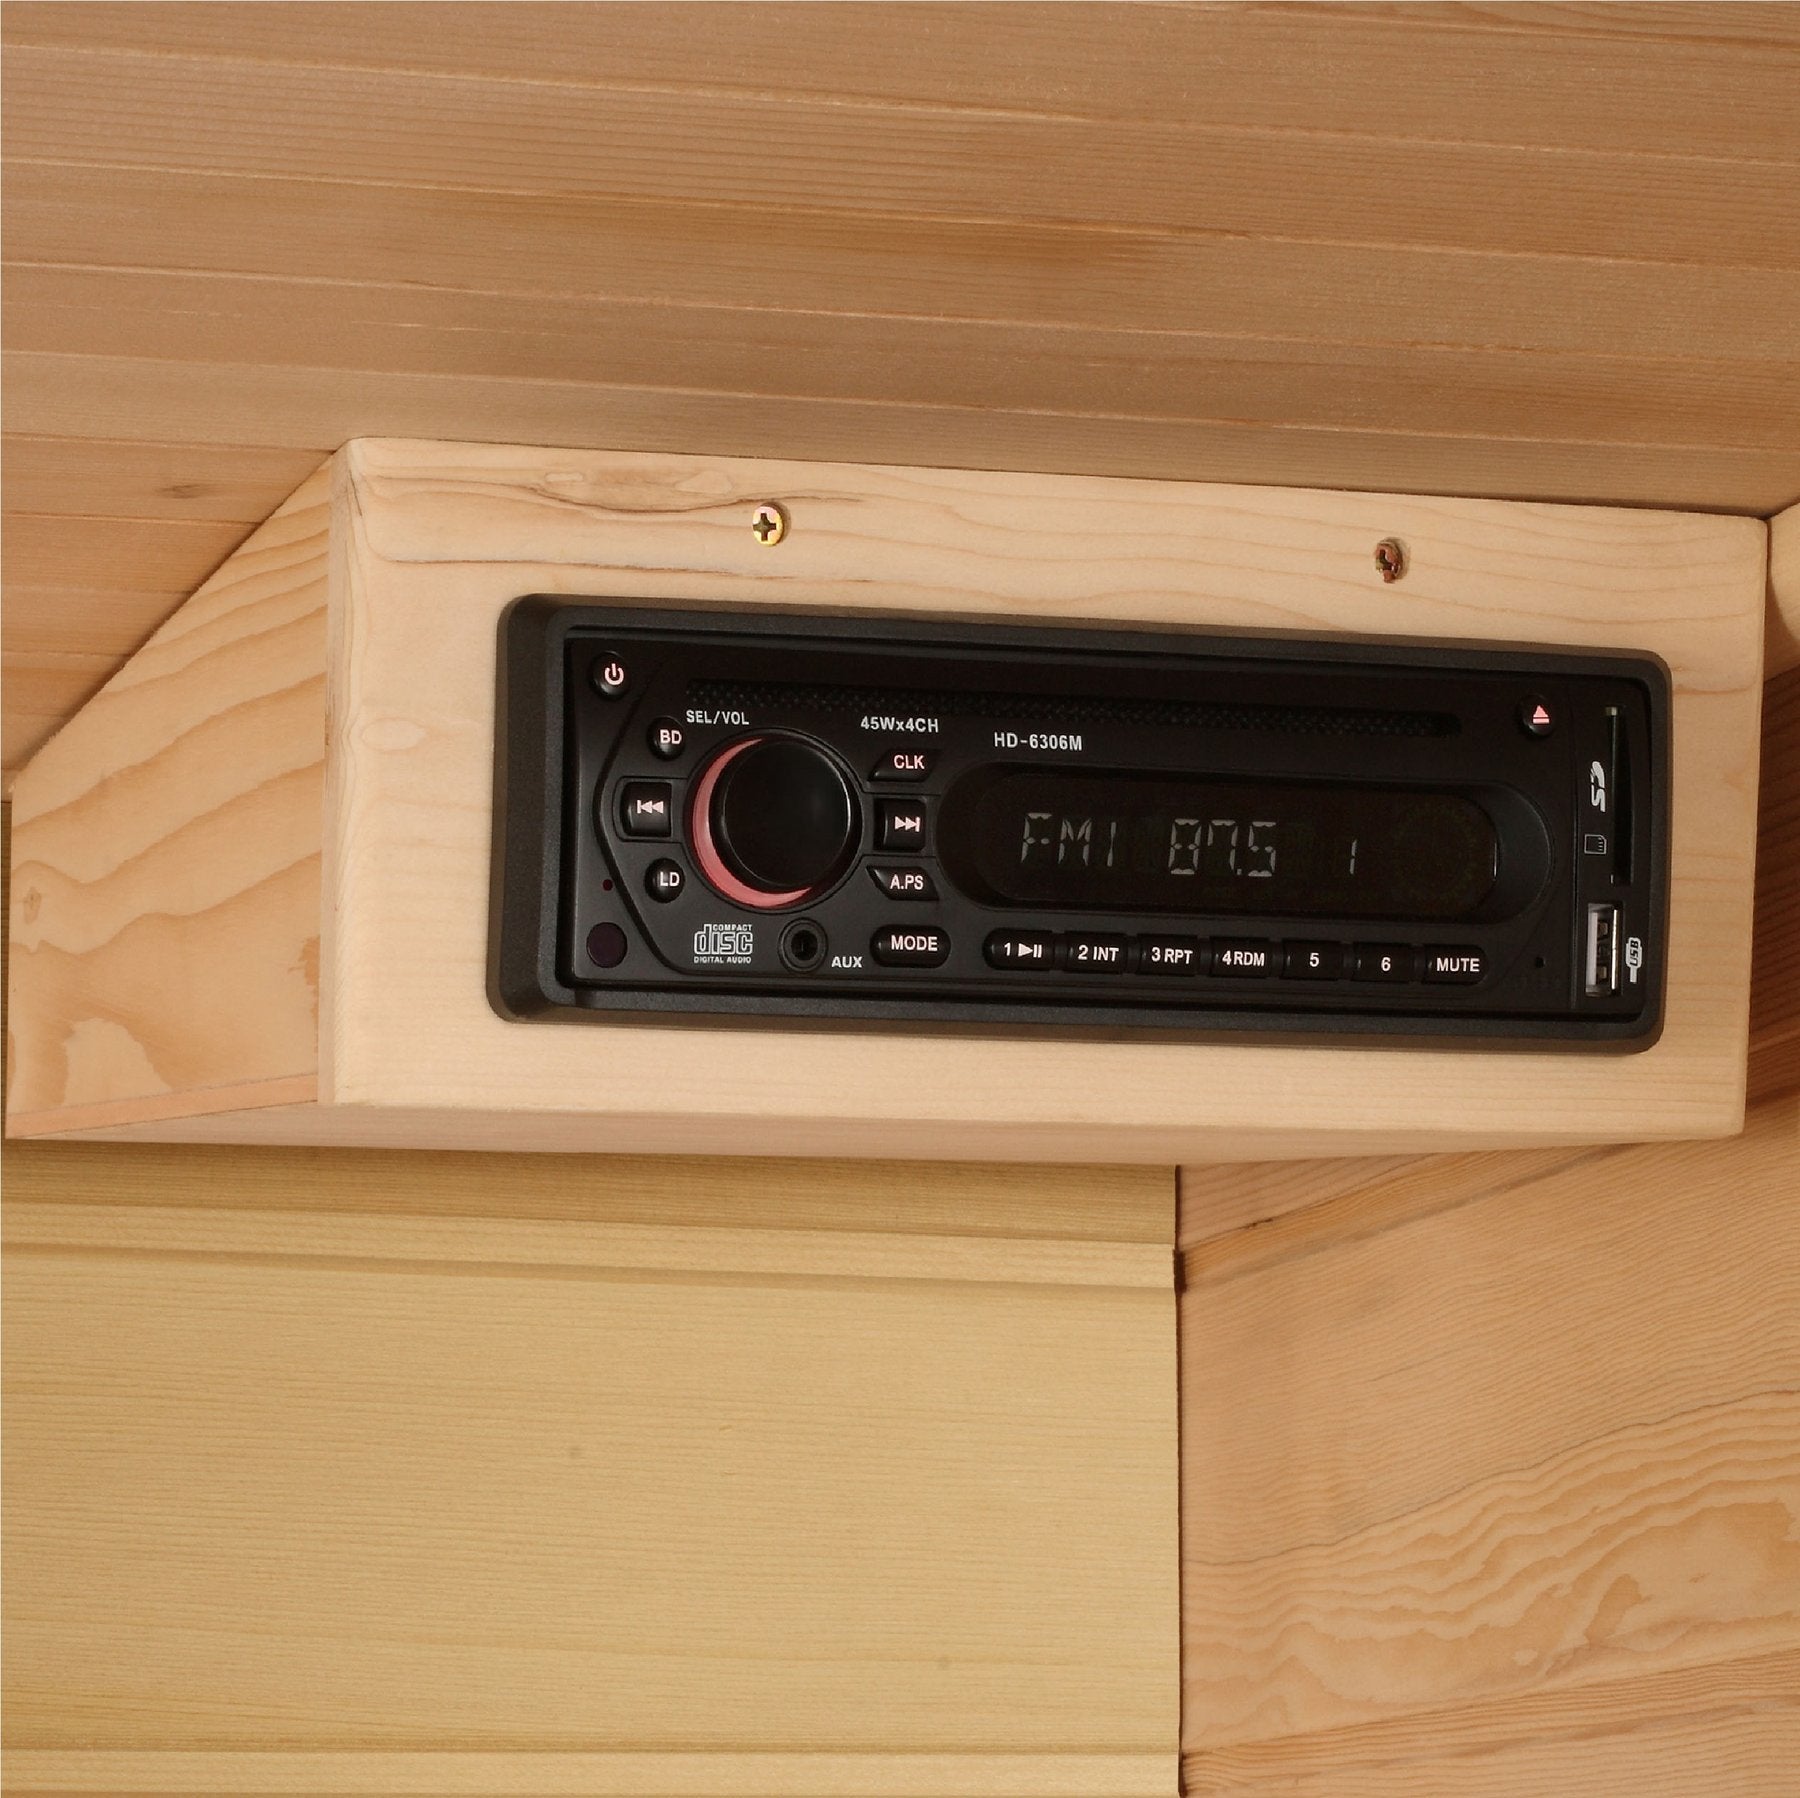 Maxxus 3 Person Low EMF Infrared Sauna Canadian Red Cedar / Promo Code "75off" for $75 Discount